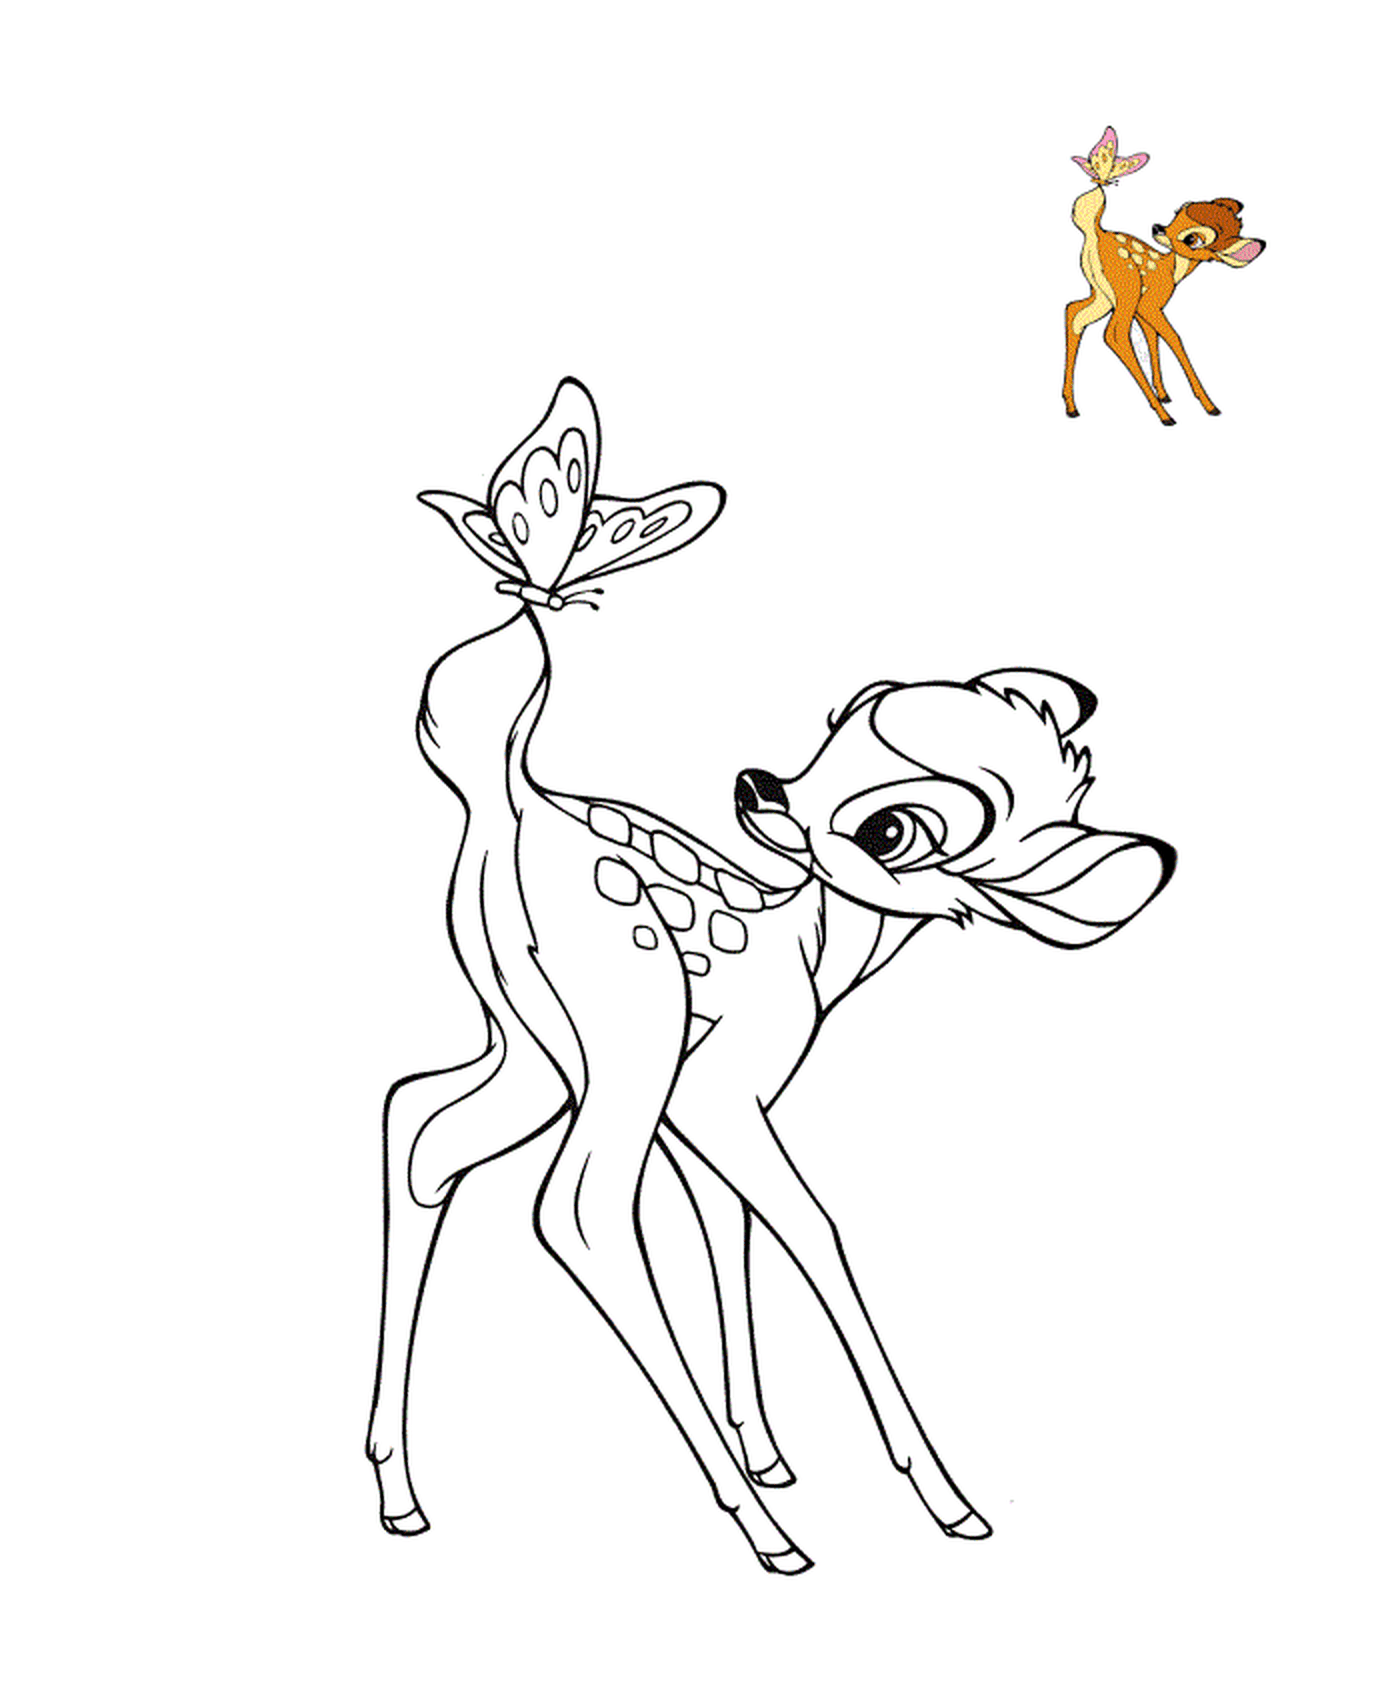  a deer and a butterfly 